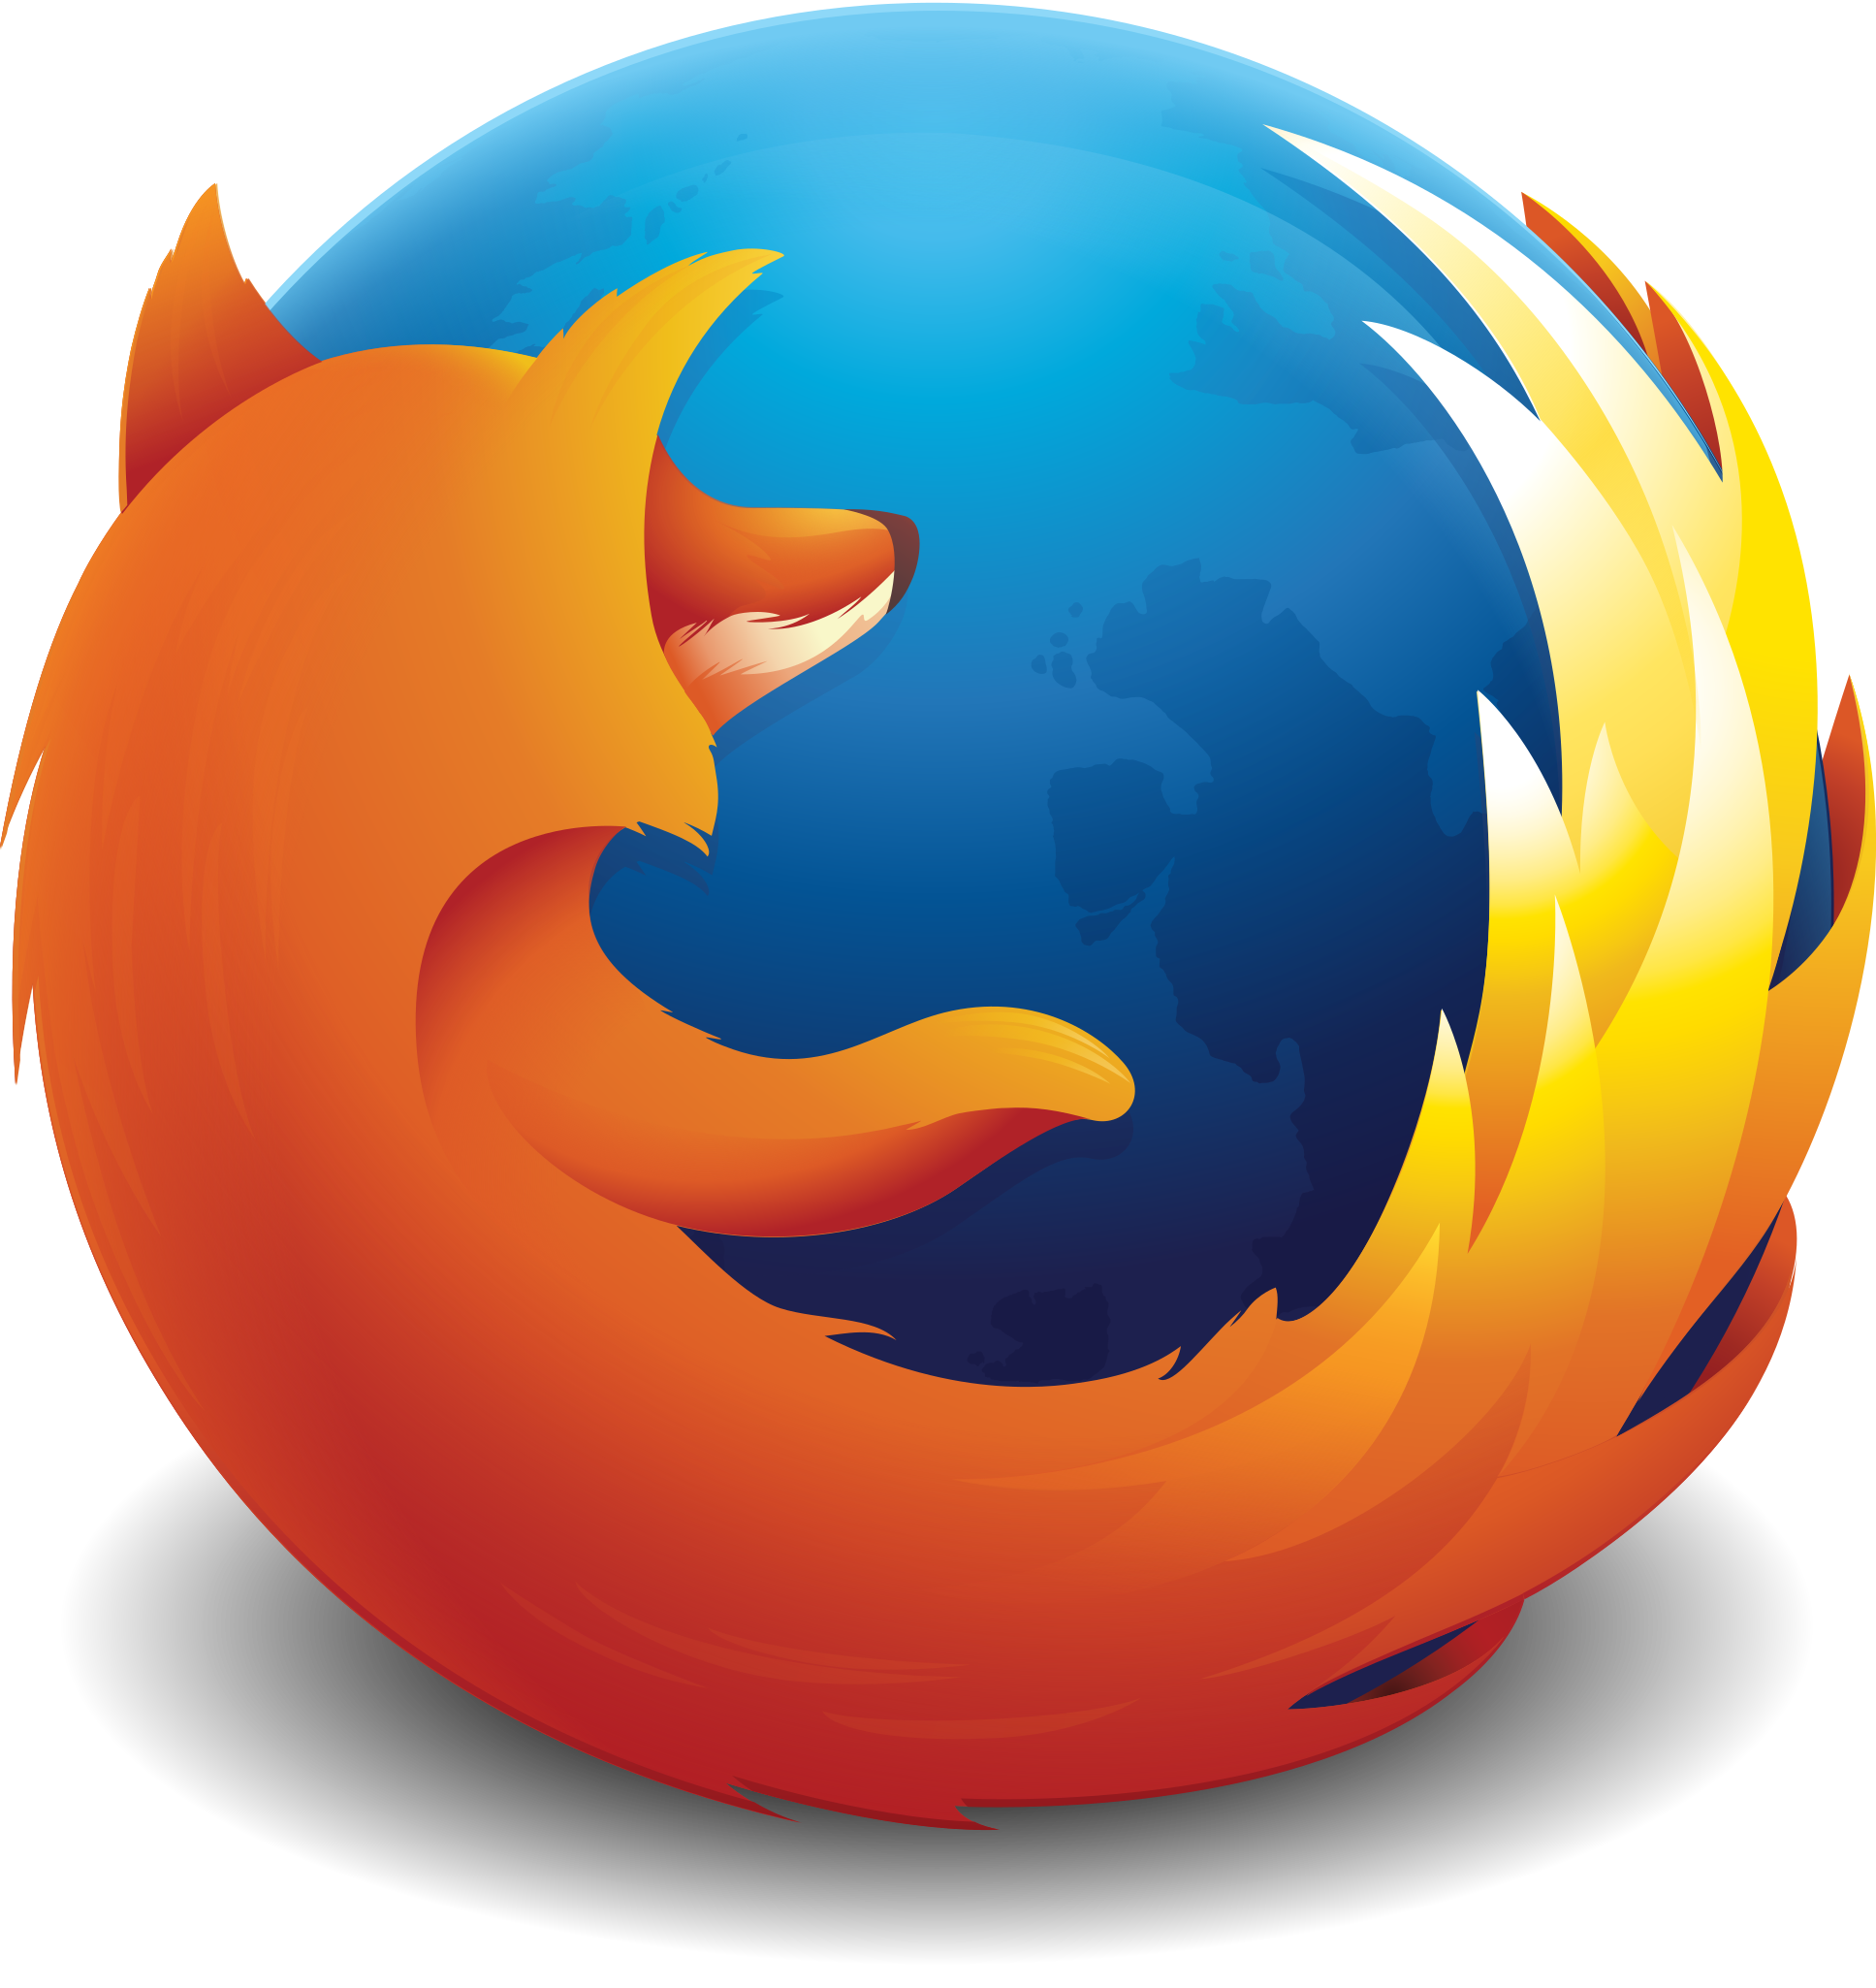 Mozilla Firefox 103.0.2 Crack + License Key Free 2022 Download From My Site https://pcproductkey.org/